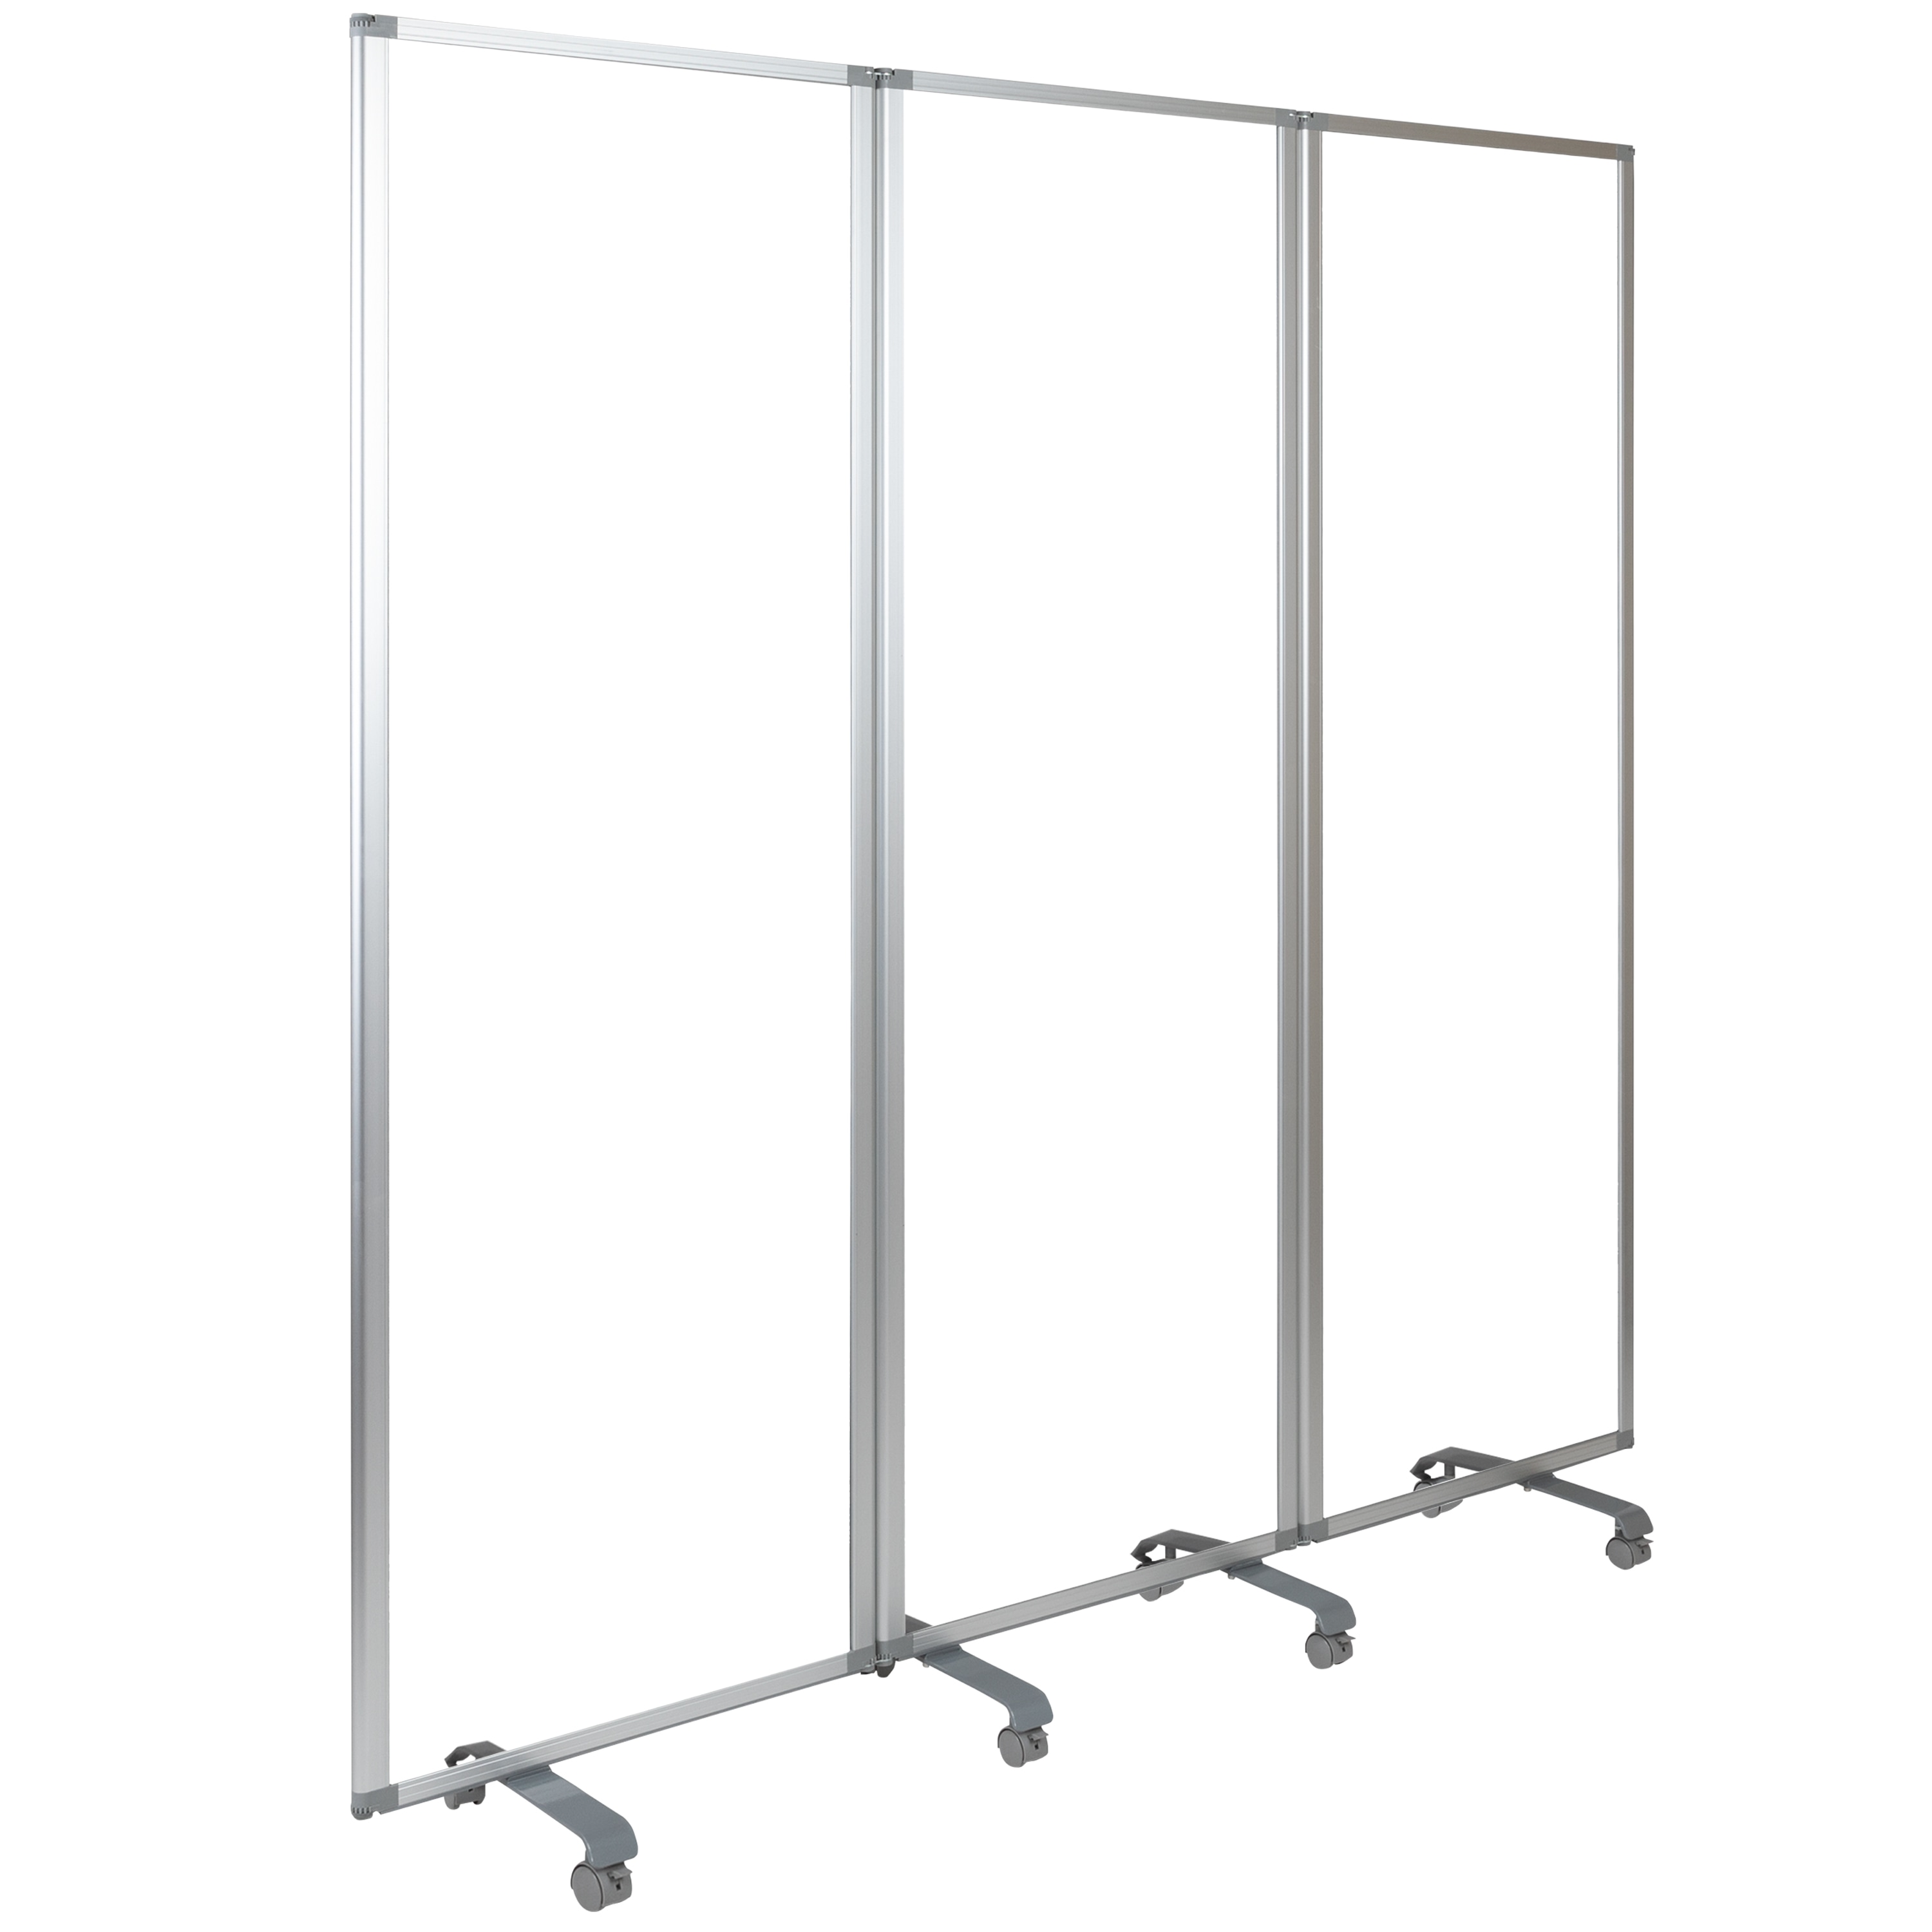 10'W x 6'H Clear Acrylic Folding Mobile Room Divider